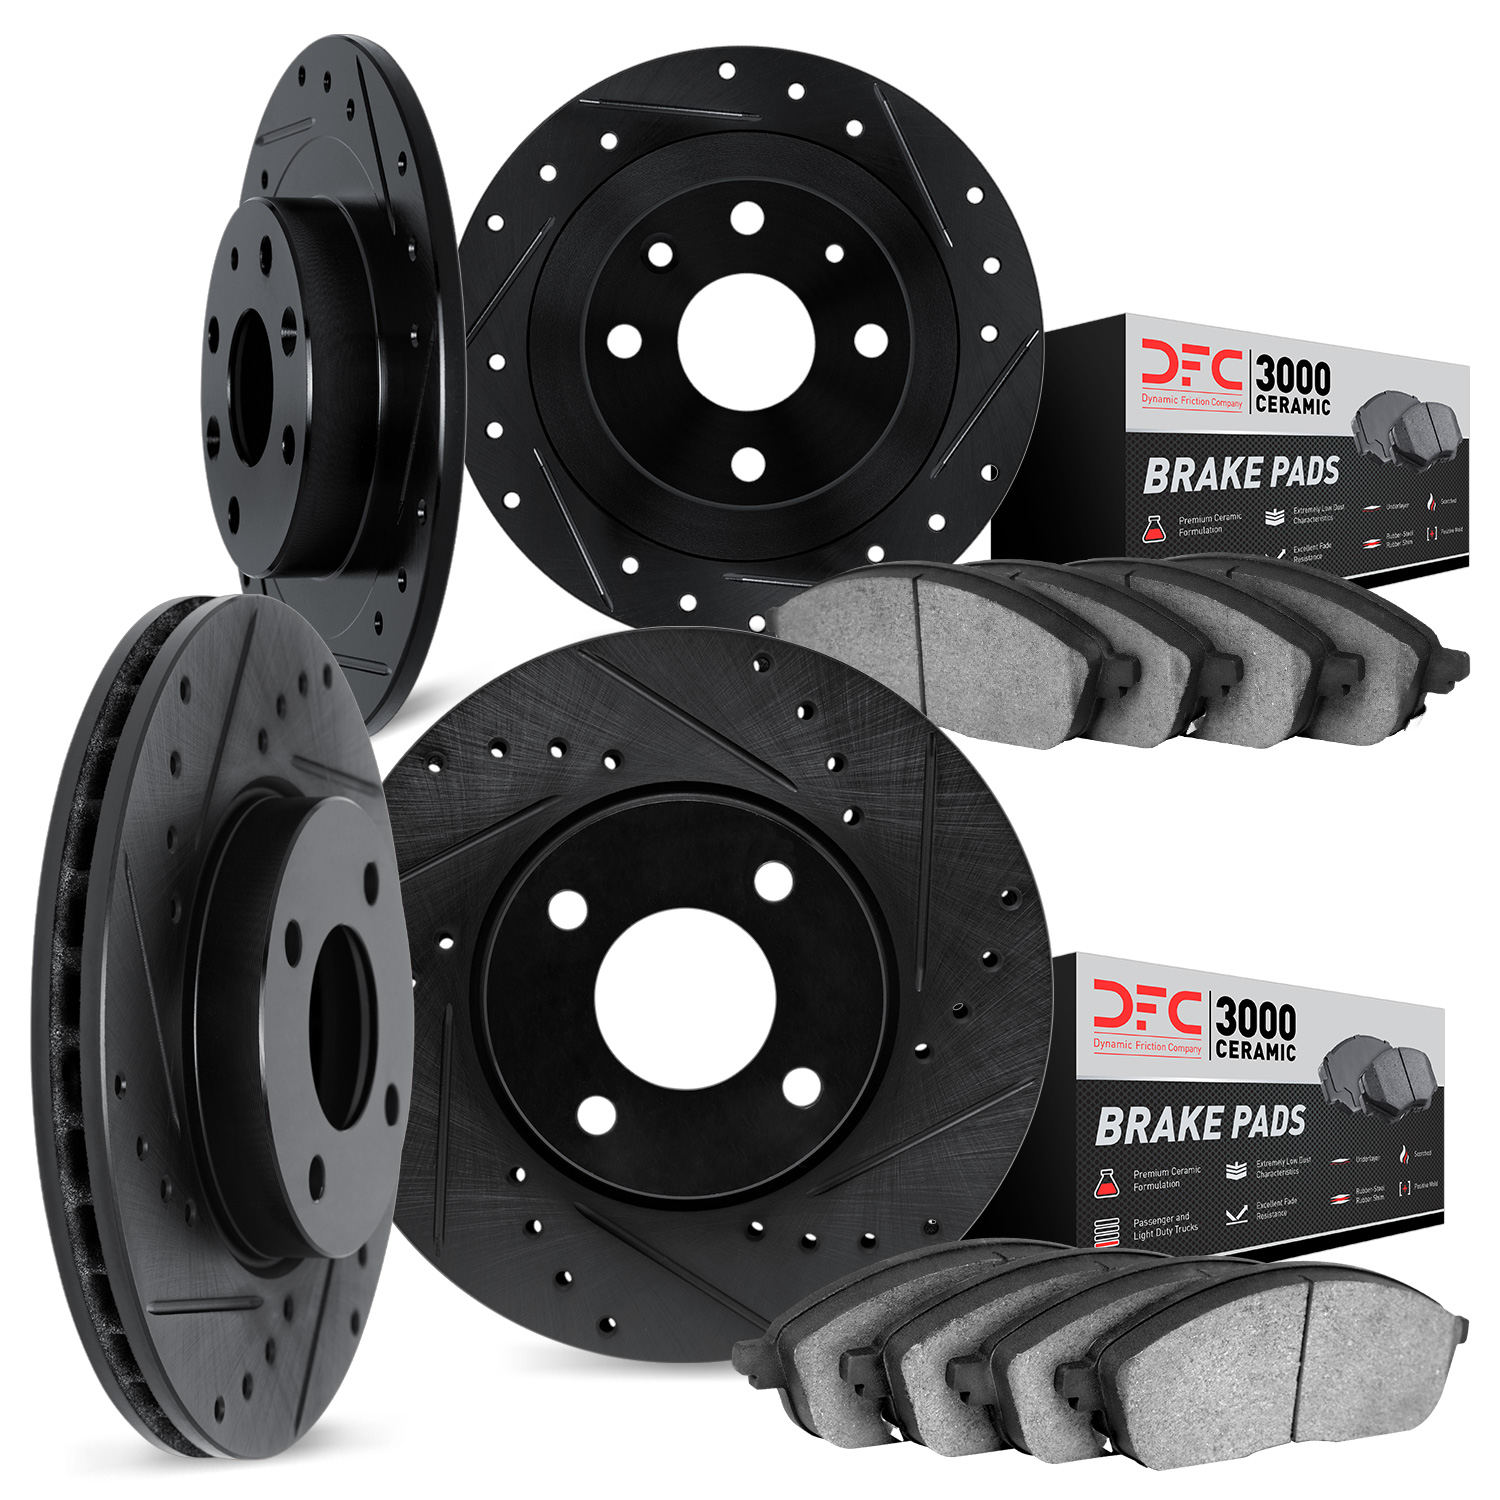 8304-59014 Drilled/Slotted Brake Rotors with 3000-Series Ceramic Brake Pads Kit [Black], 1992-1993 Acura/Honda, Position: Front